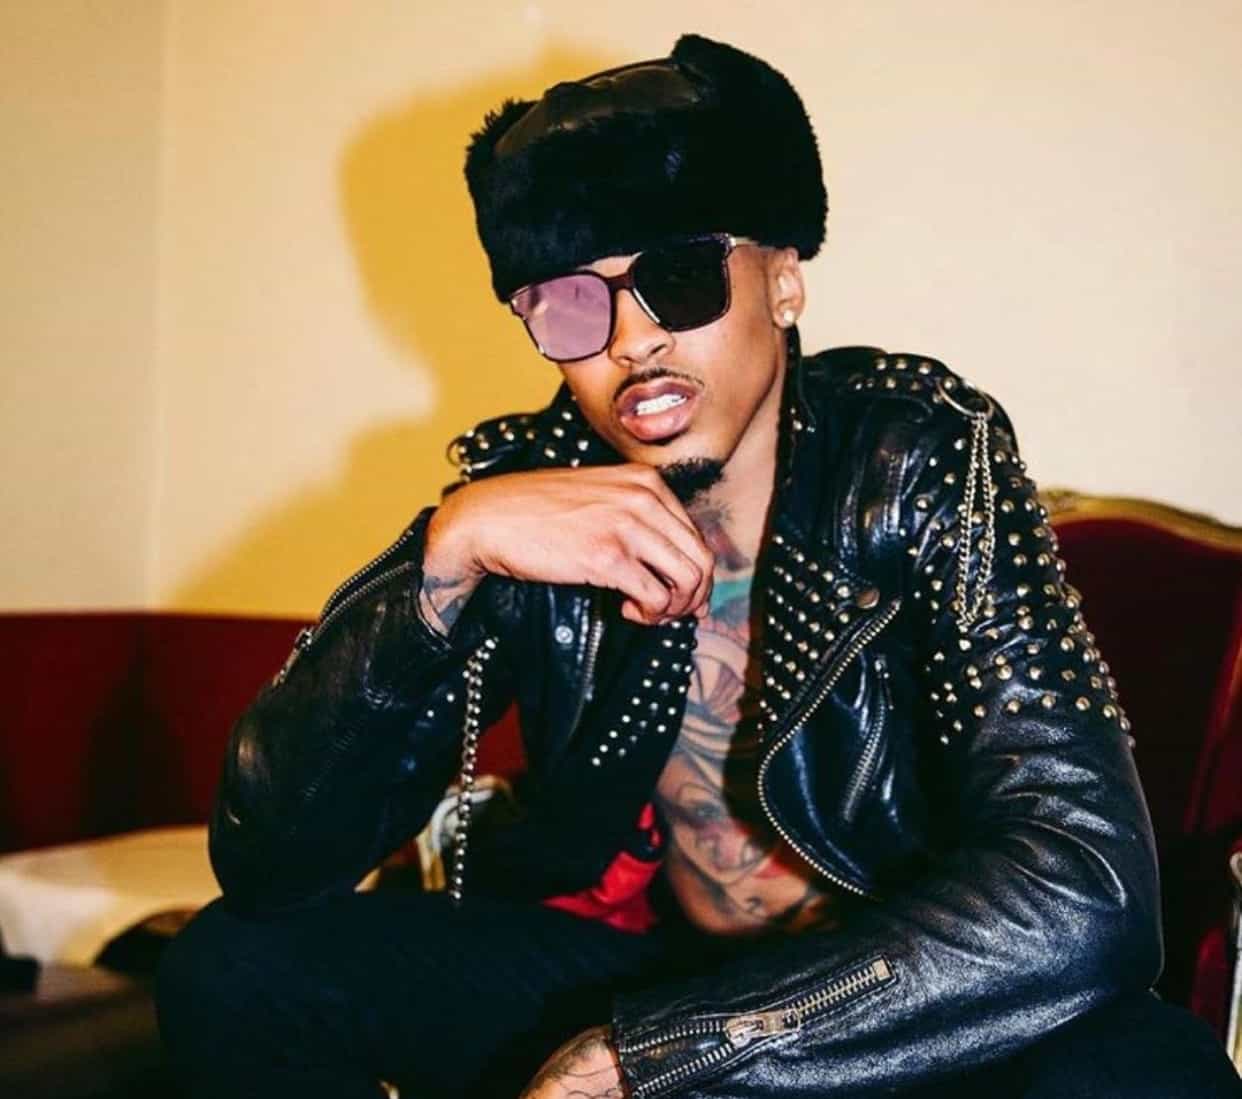 New Music August Alsina - Nola + Rounds + Work To Do